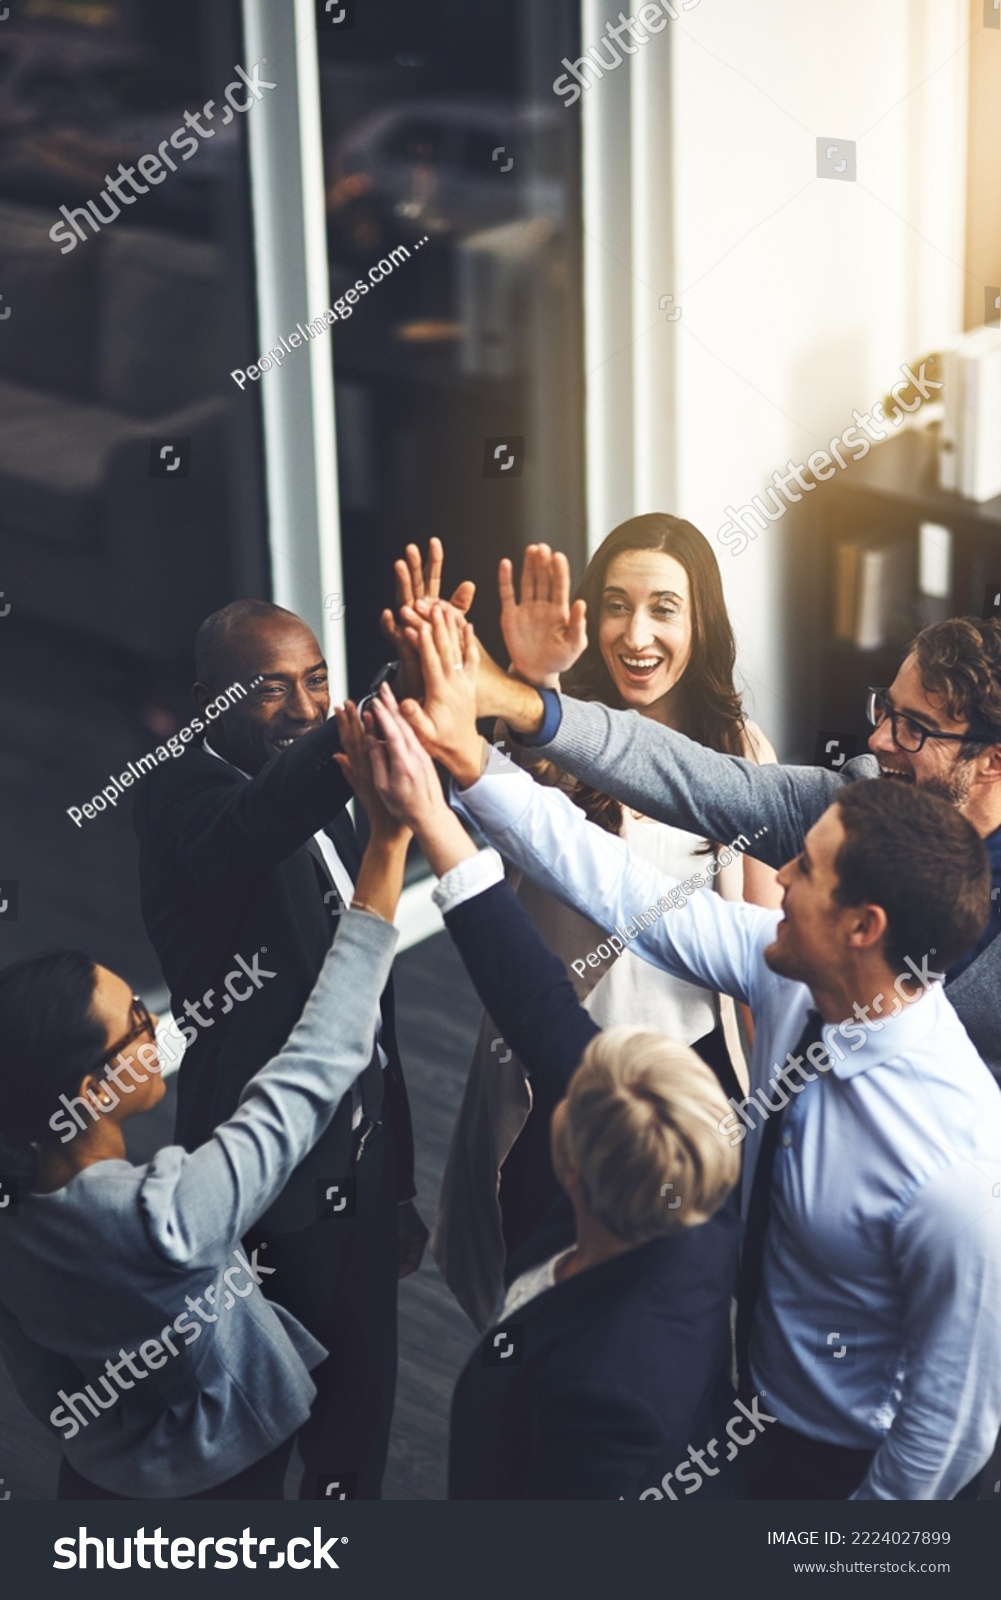 Were going to succeed no matter what. Shot of a group of businesspeople high fiving in an office. #2224027899